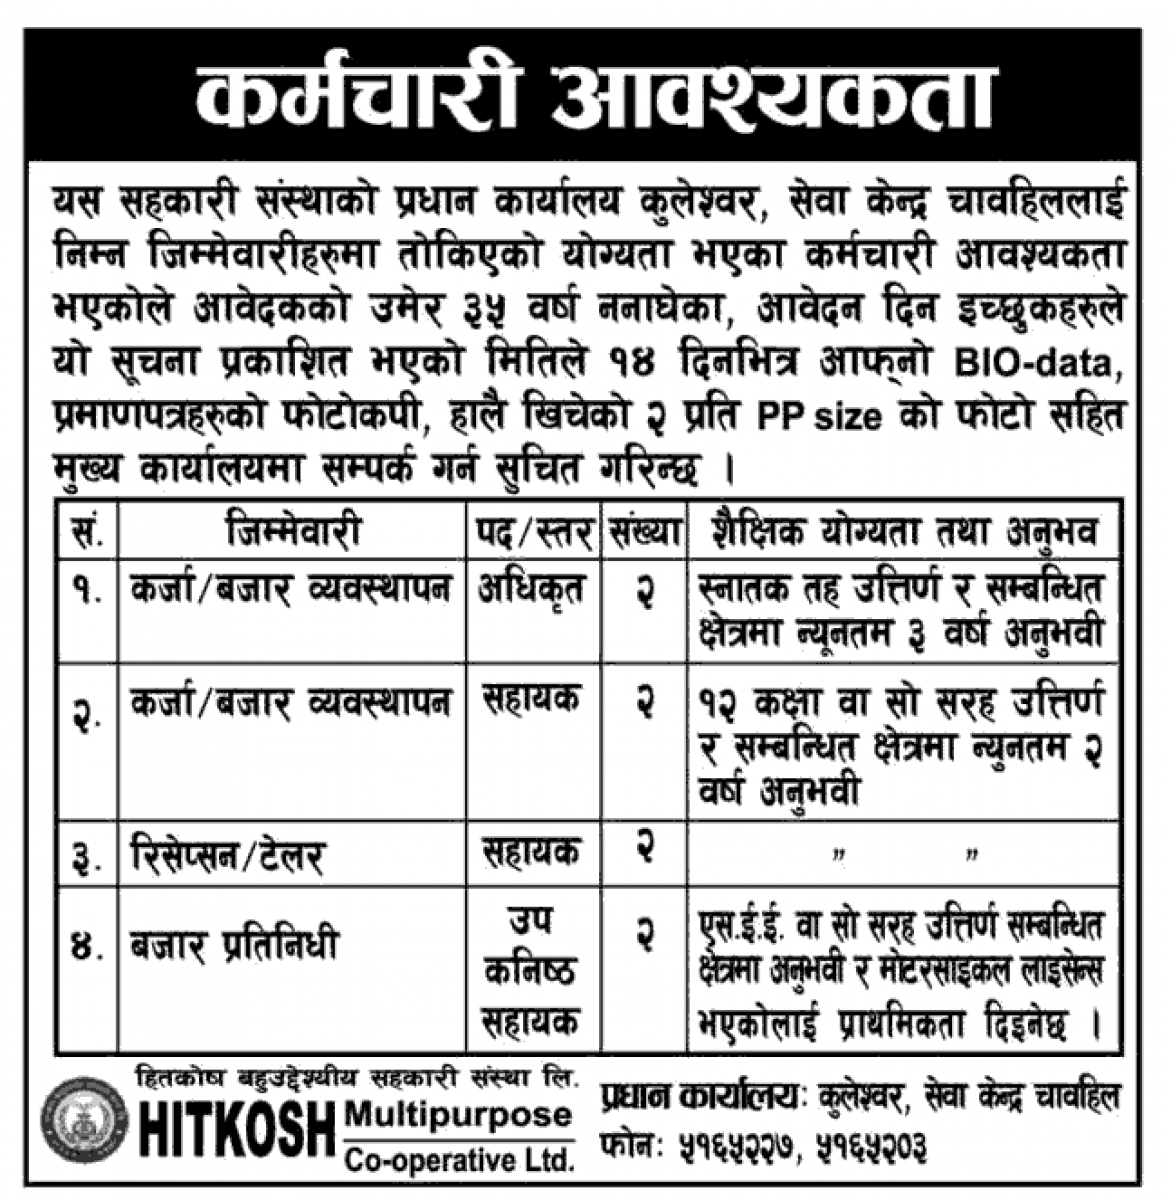 Hitkosh Multipurpose Cooperative Limited Vacancy for Various Positions